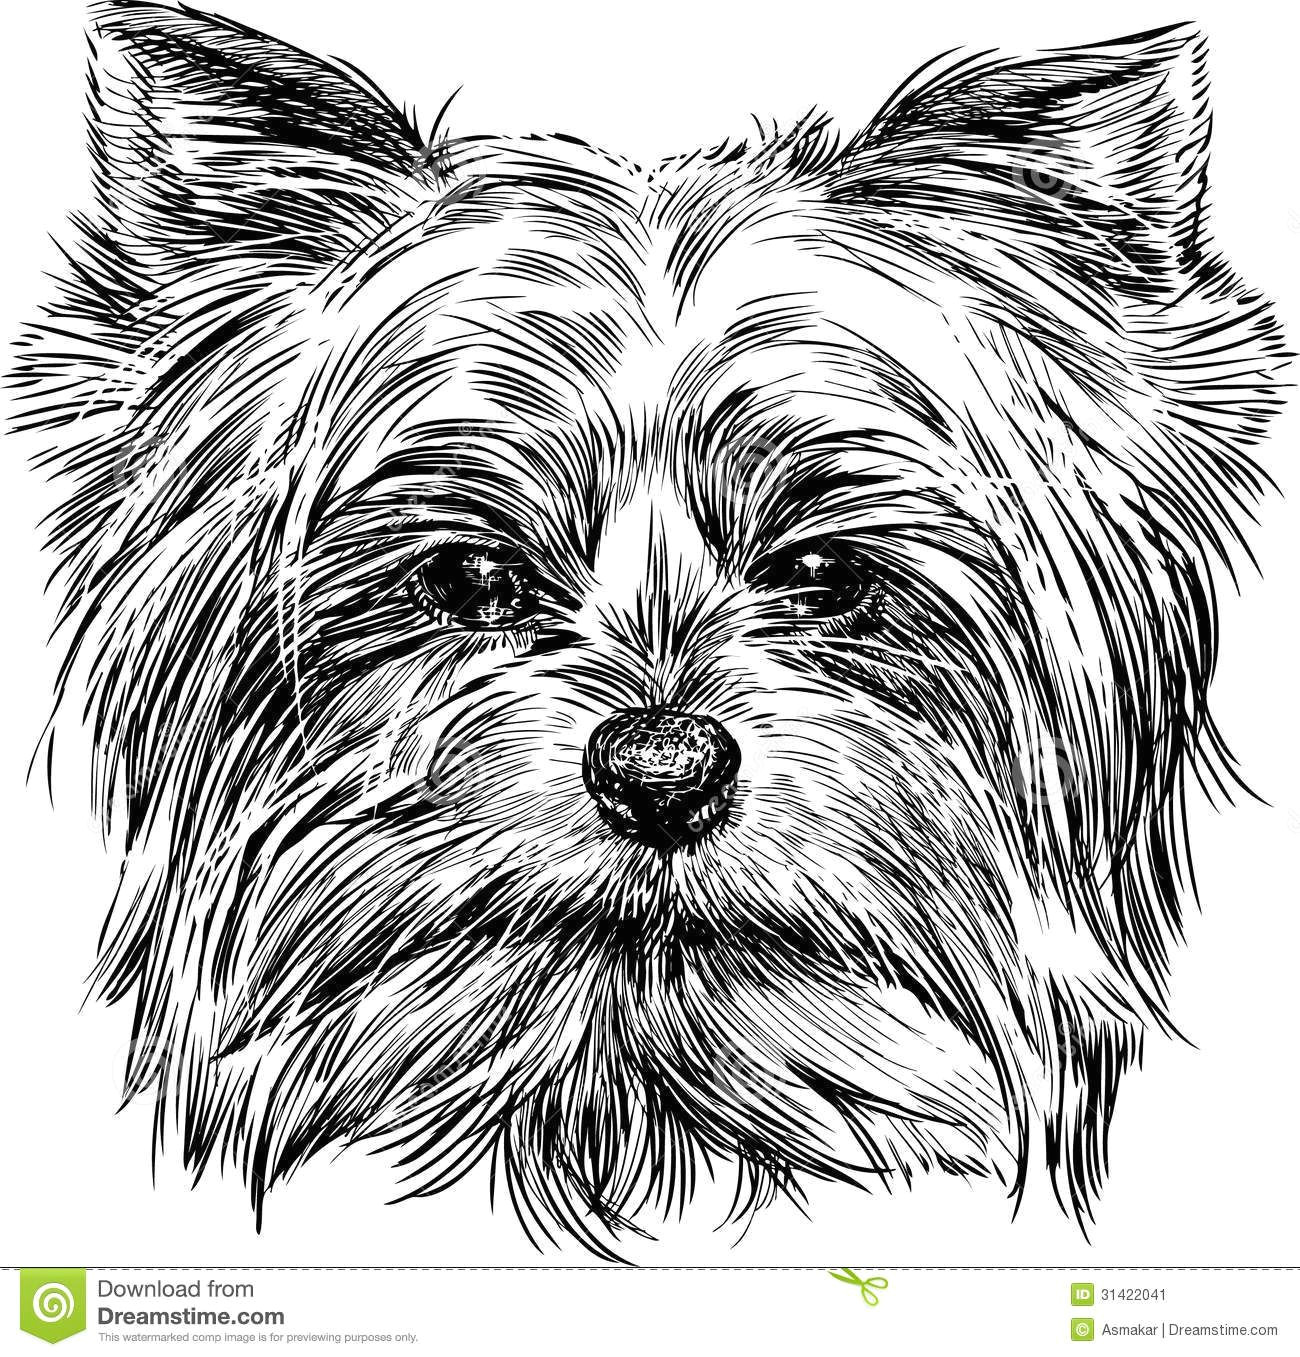 Drawing A Dog In Illustrator Pin by Michelle Ross On Sewing Patterns Pinterest Sketches Dog